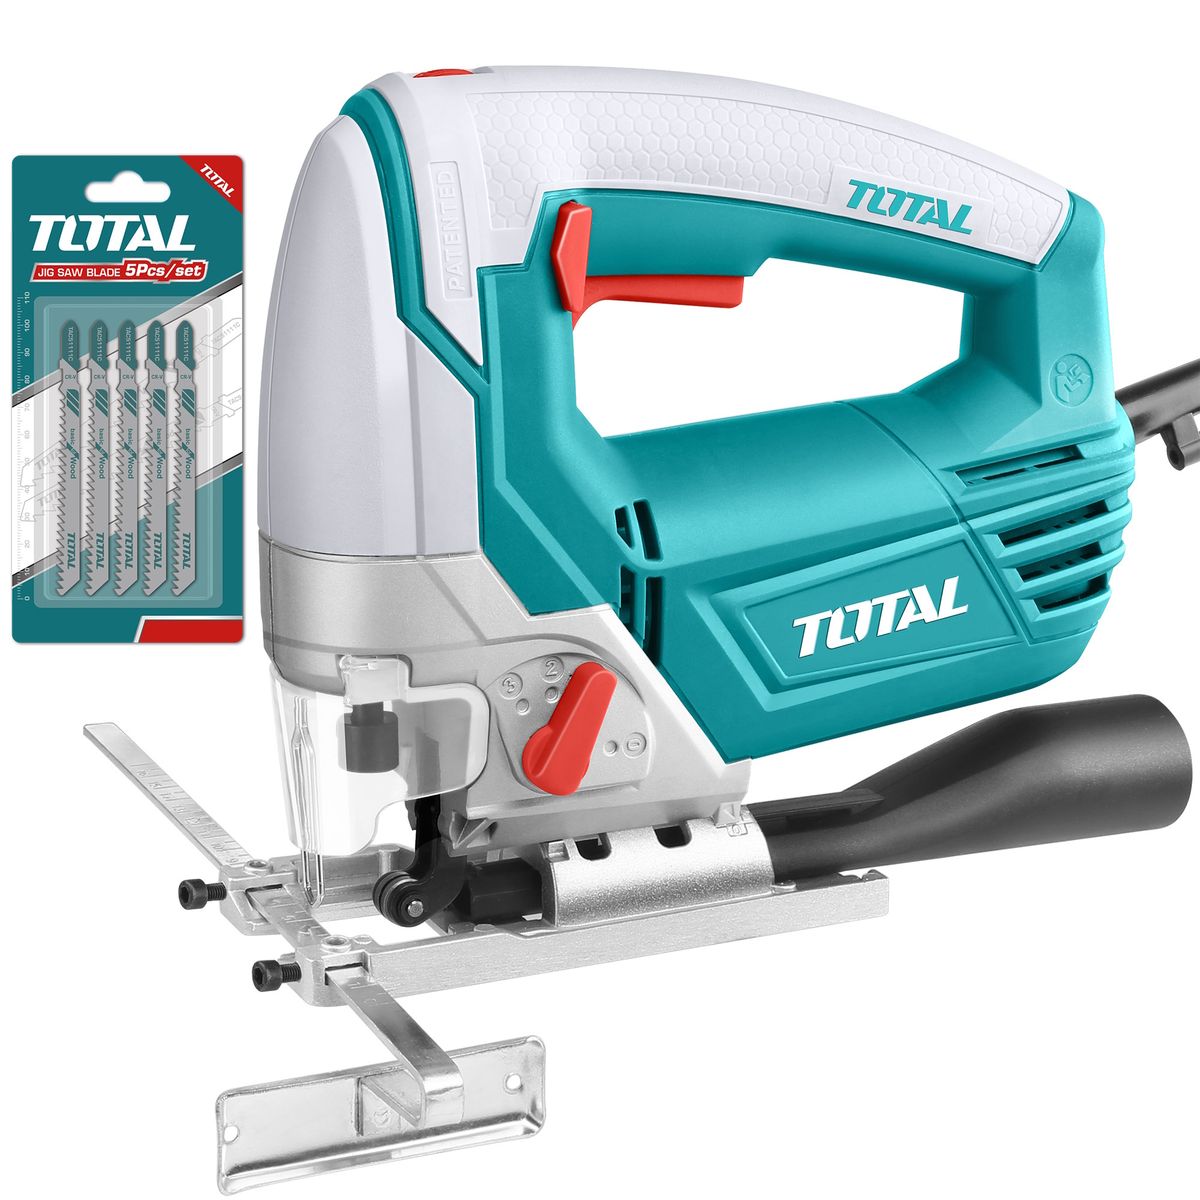 Total Tools 800W Jig Saw